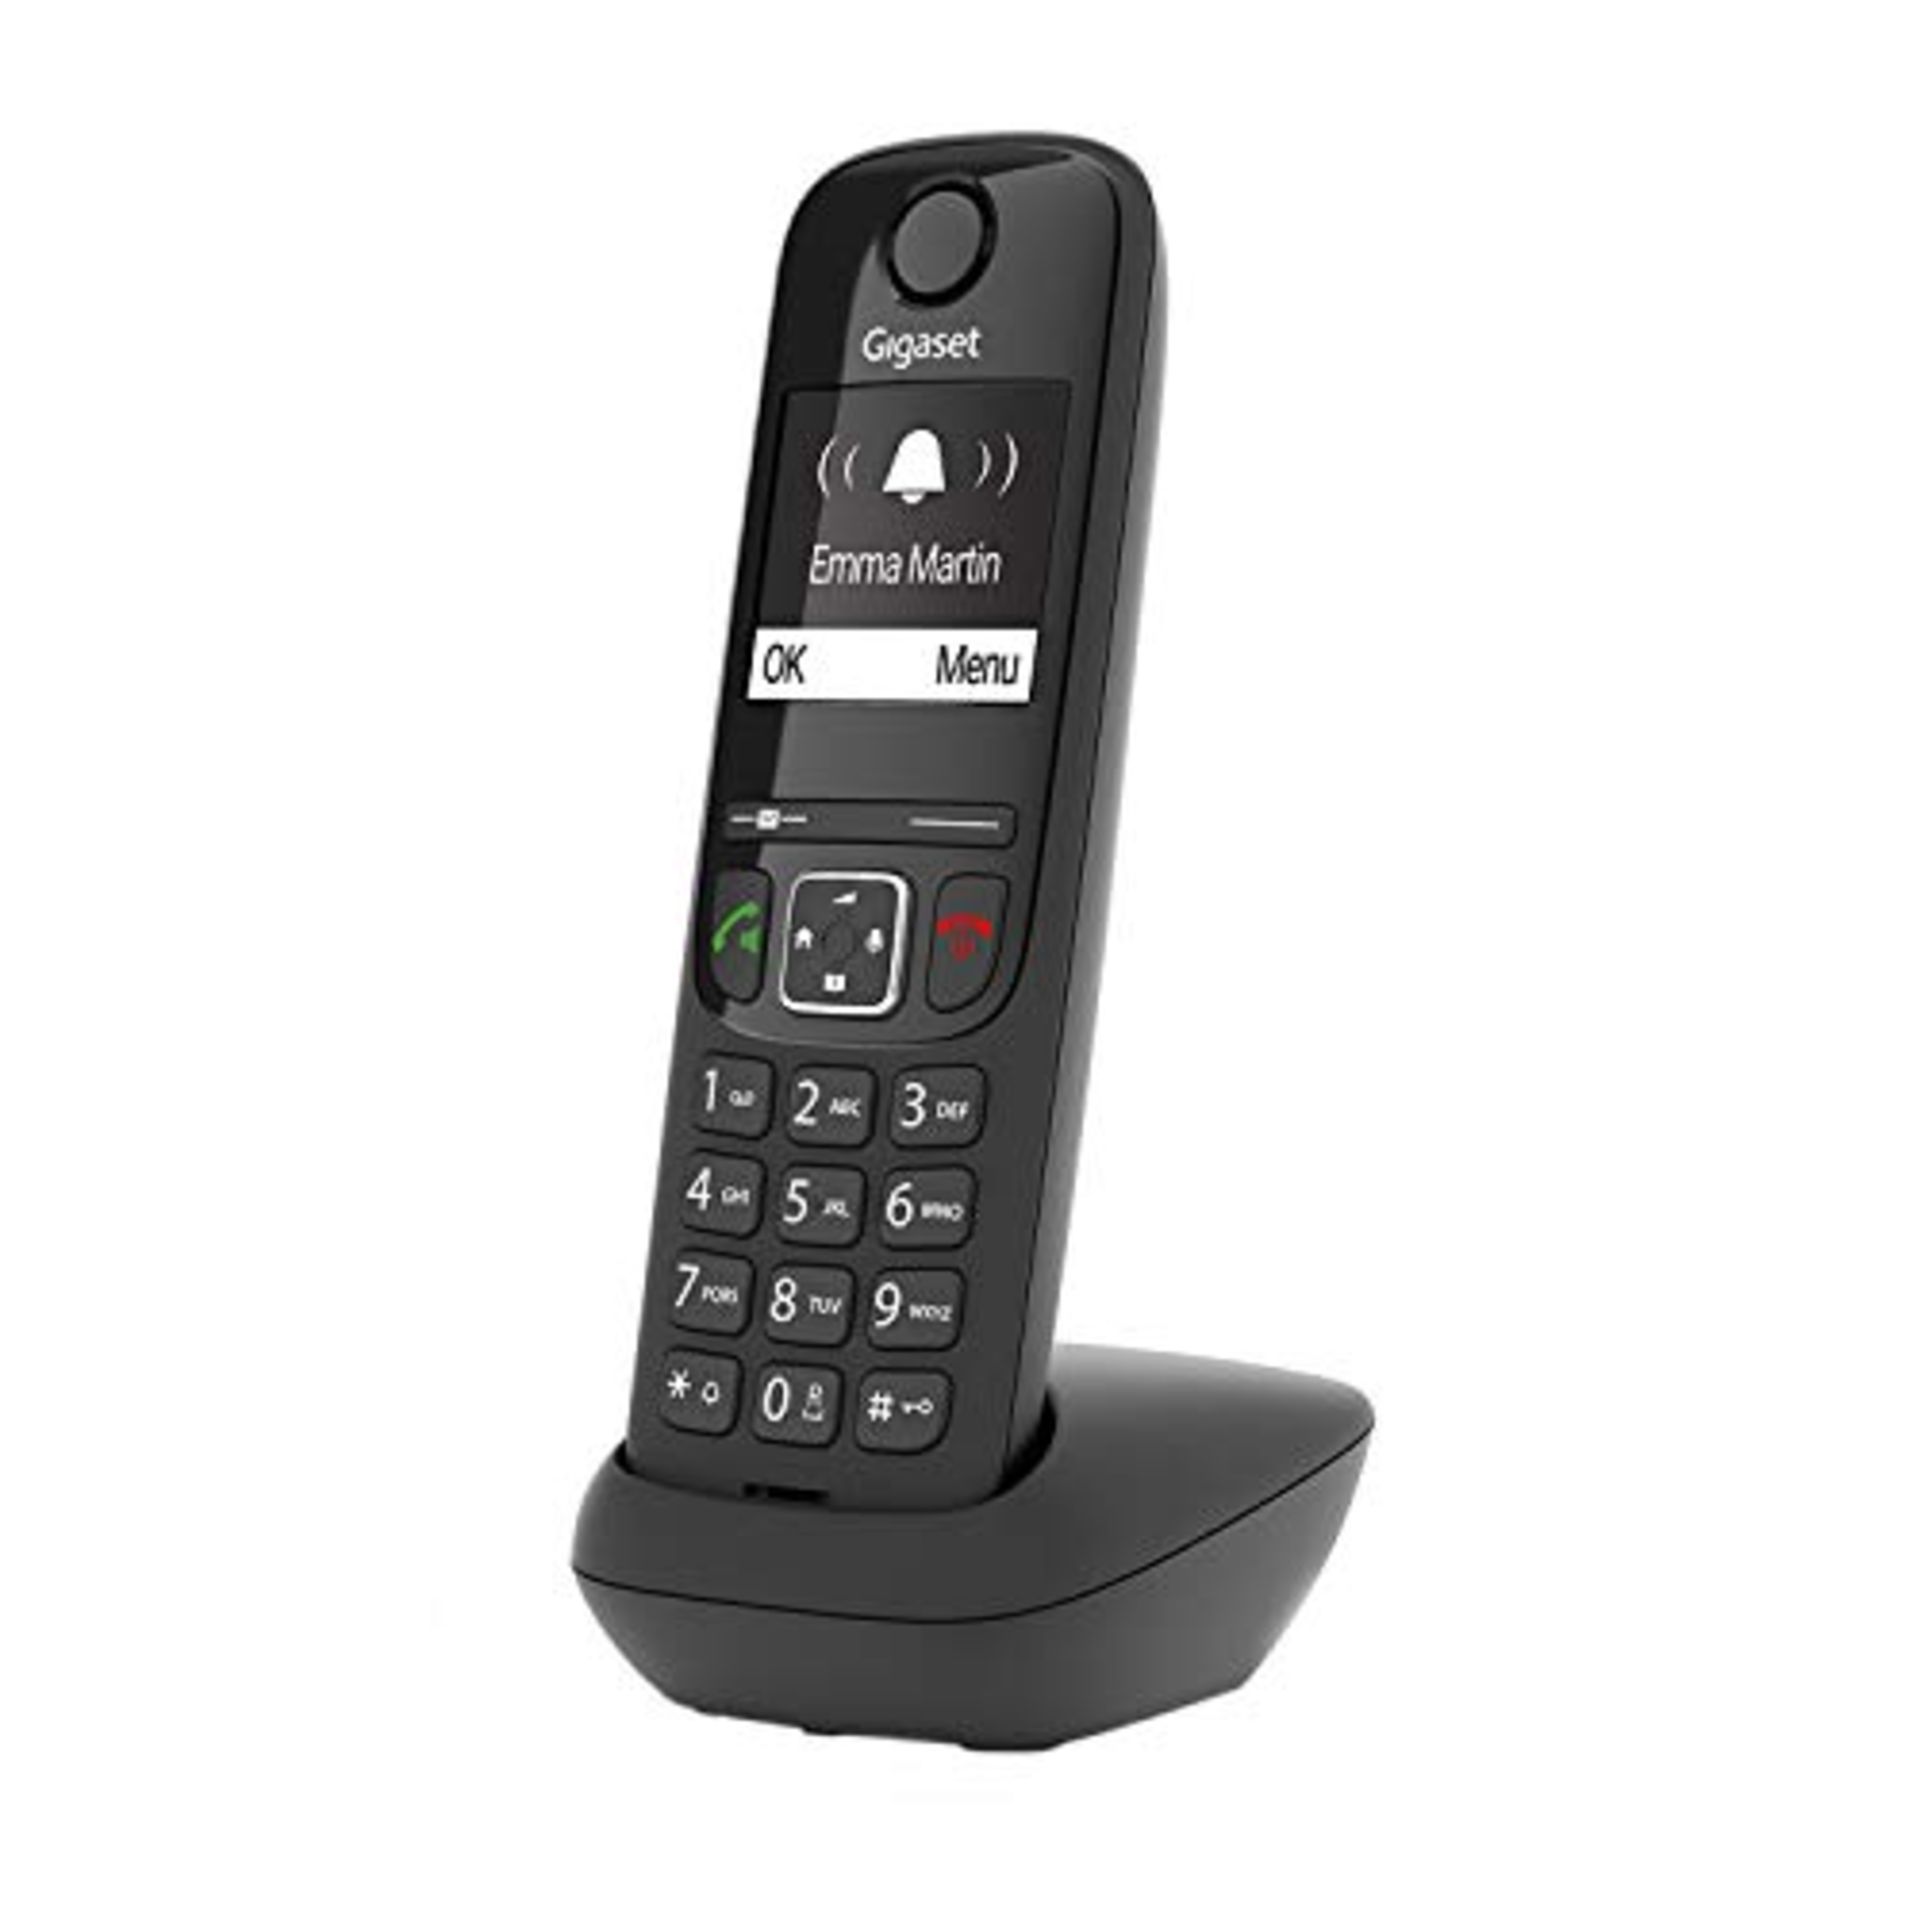 Gigaset AS690HX - DECT handset with charging cradle - high-quality cordless phone for